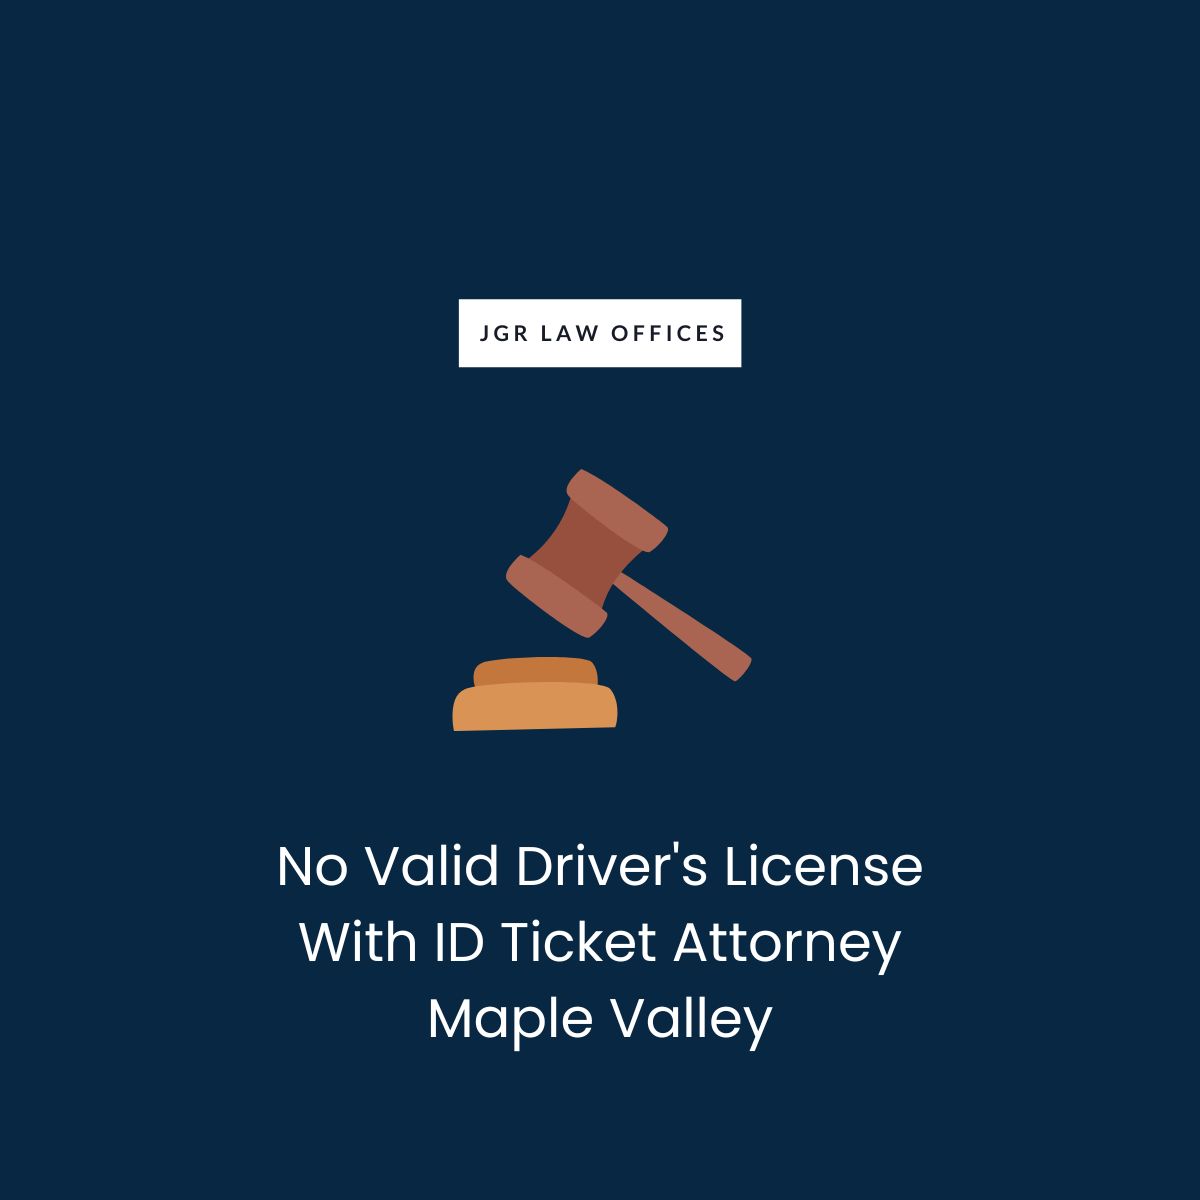 No Valid Driver's License With ID Ticket Attorney Maple Valley